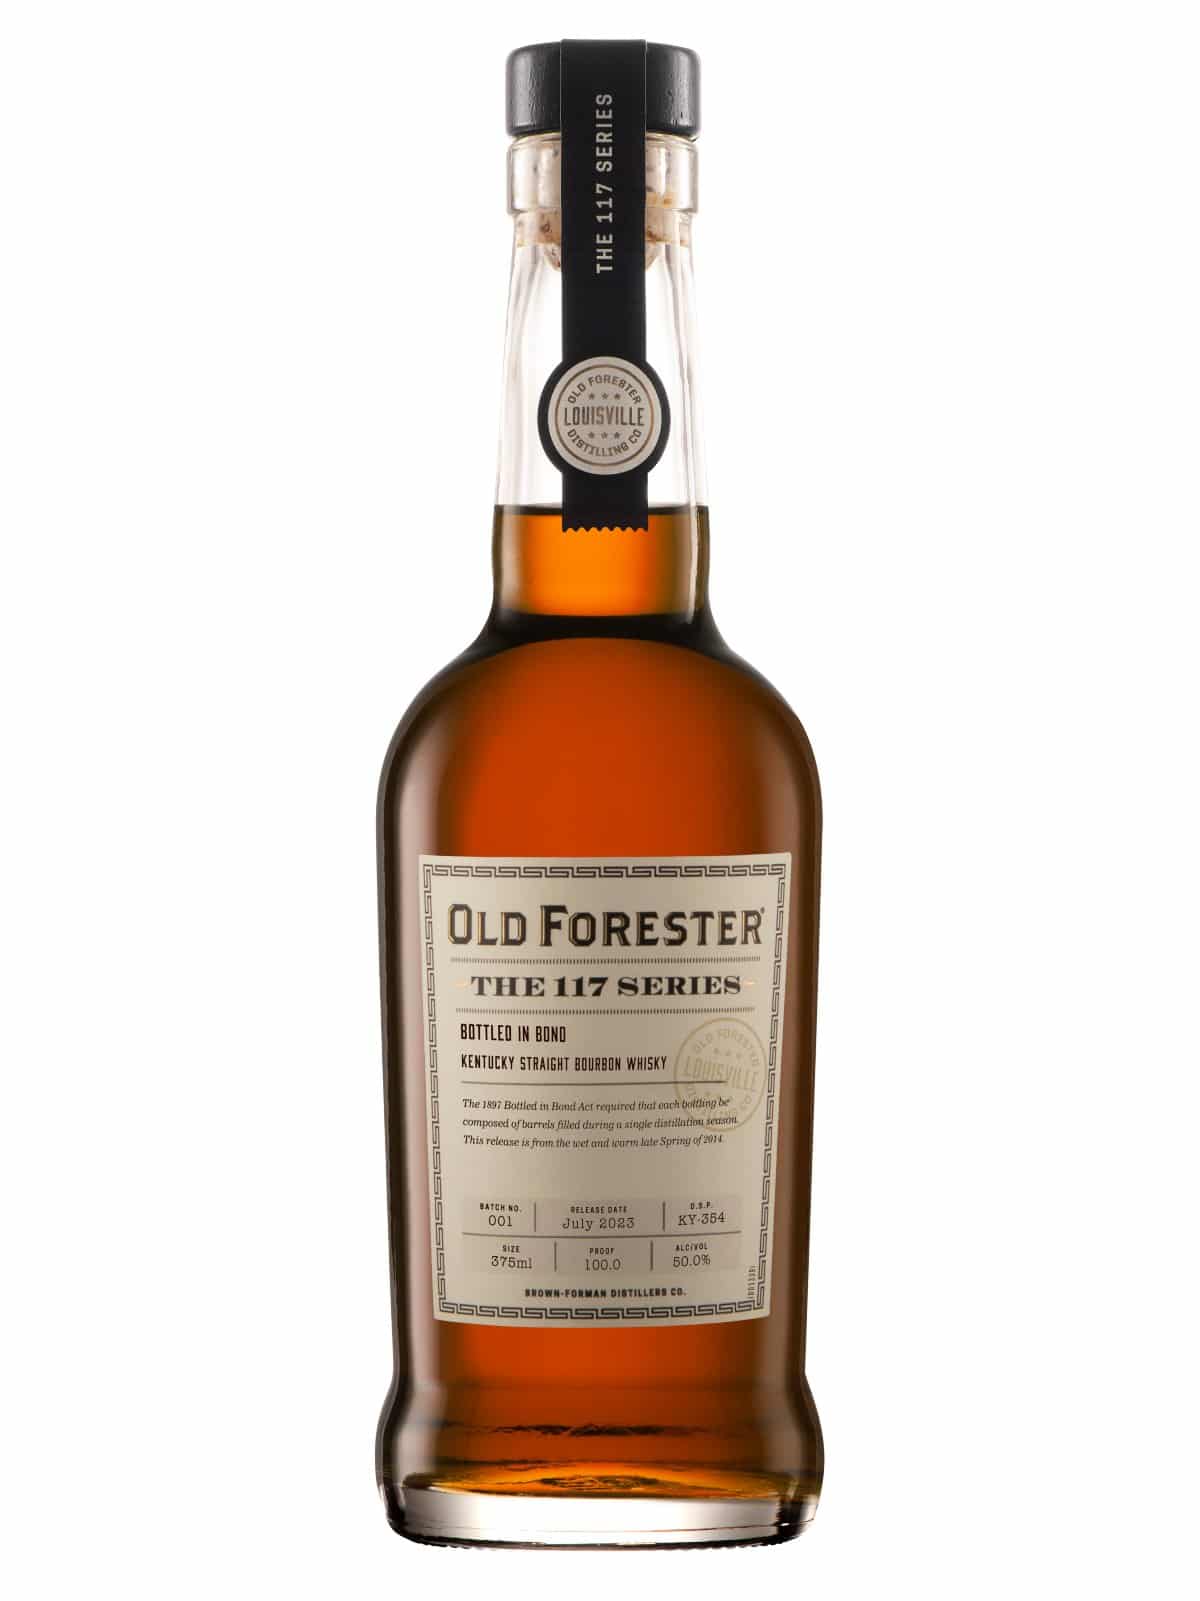 Old Forester Series 117 Bottled in Bond featured